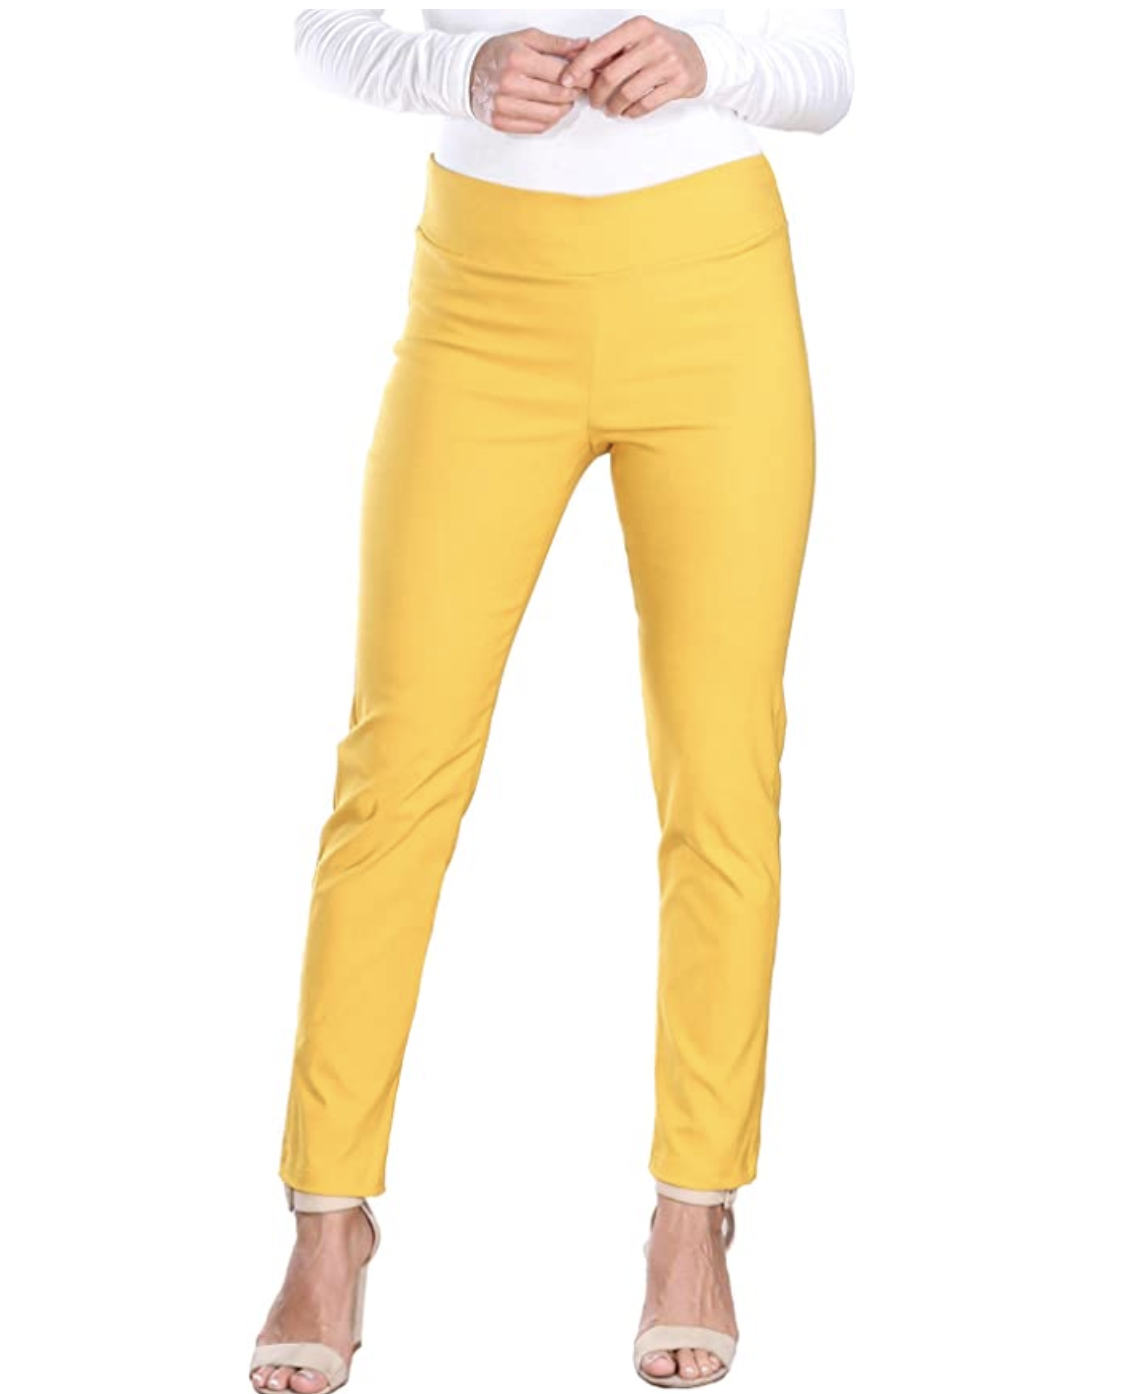 Buy > comfy dress pants womens > in stock